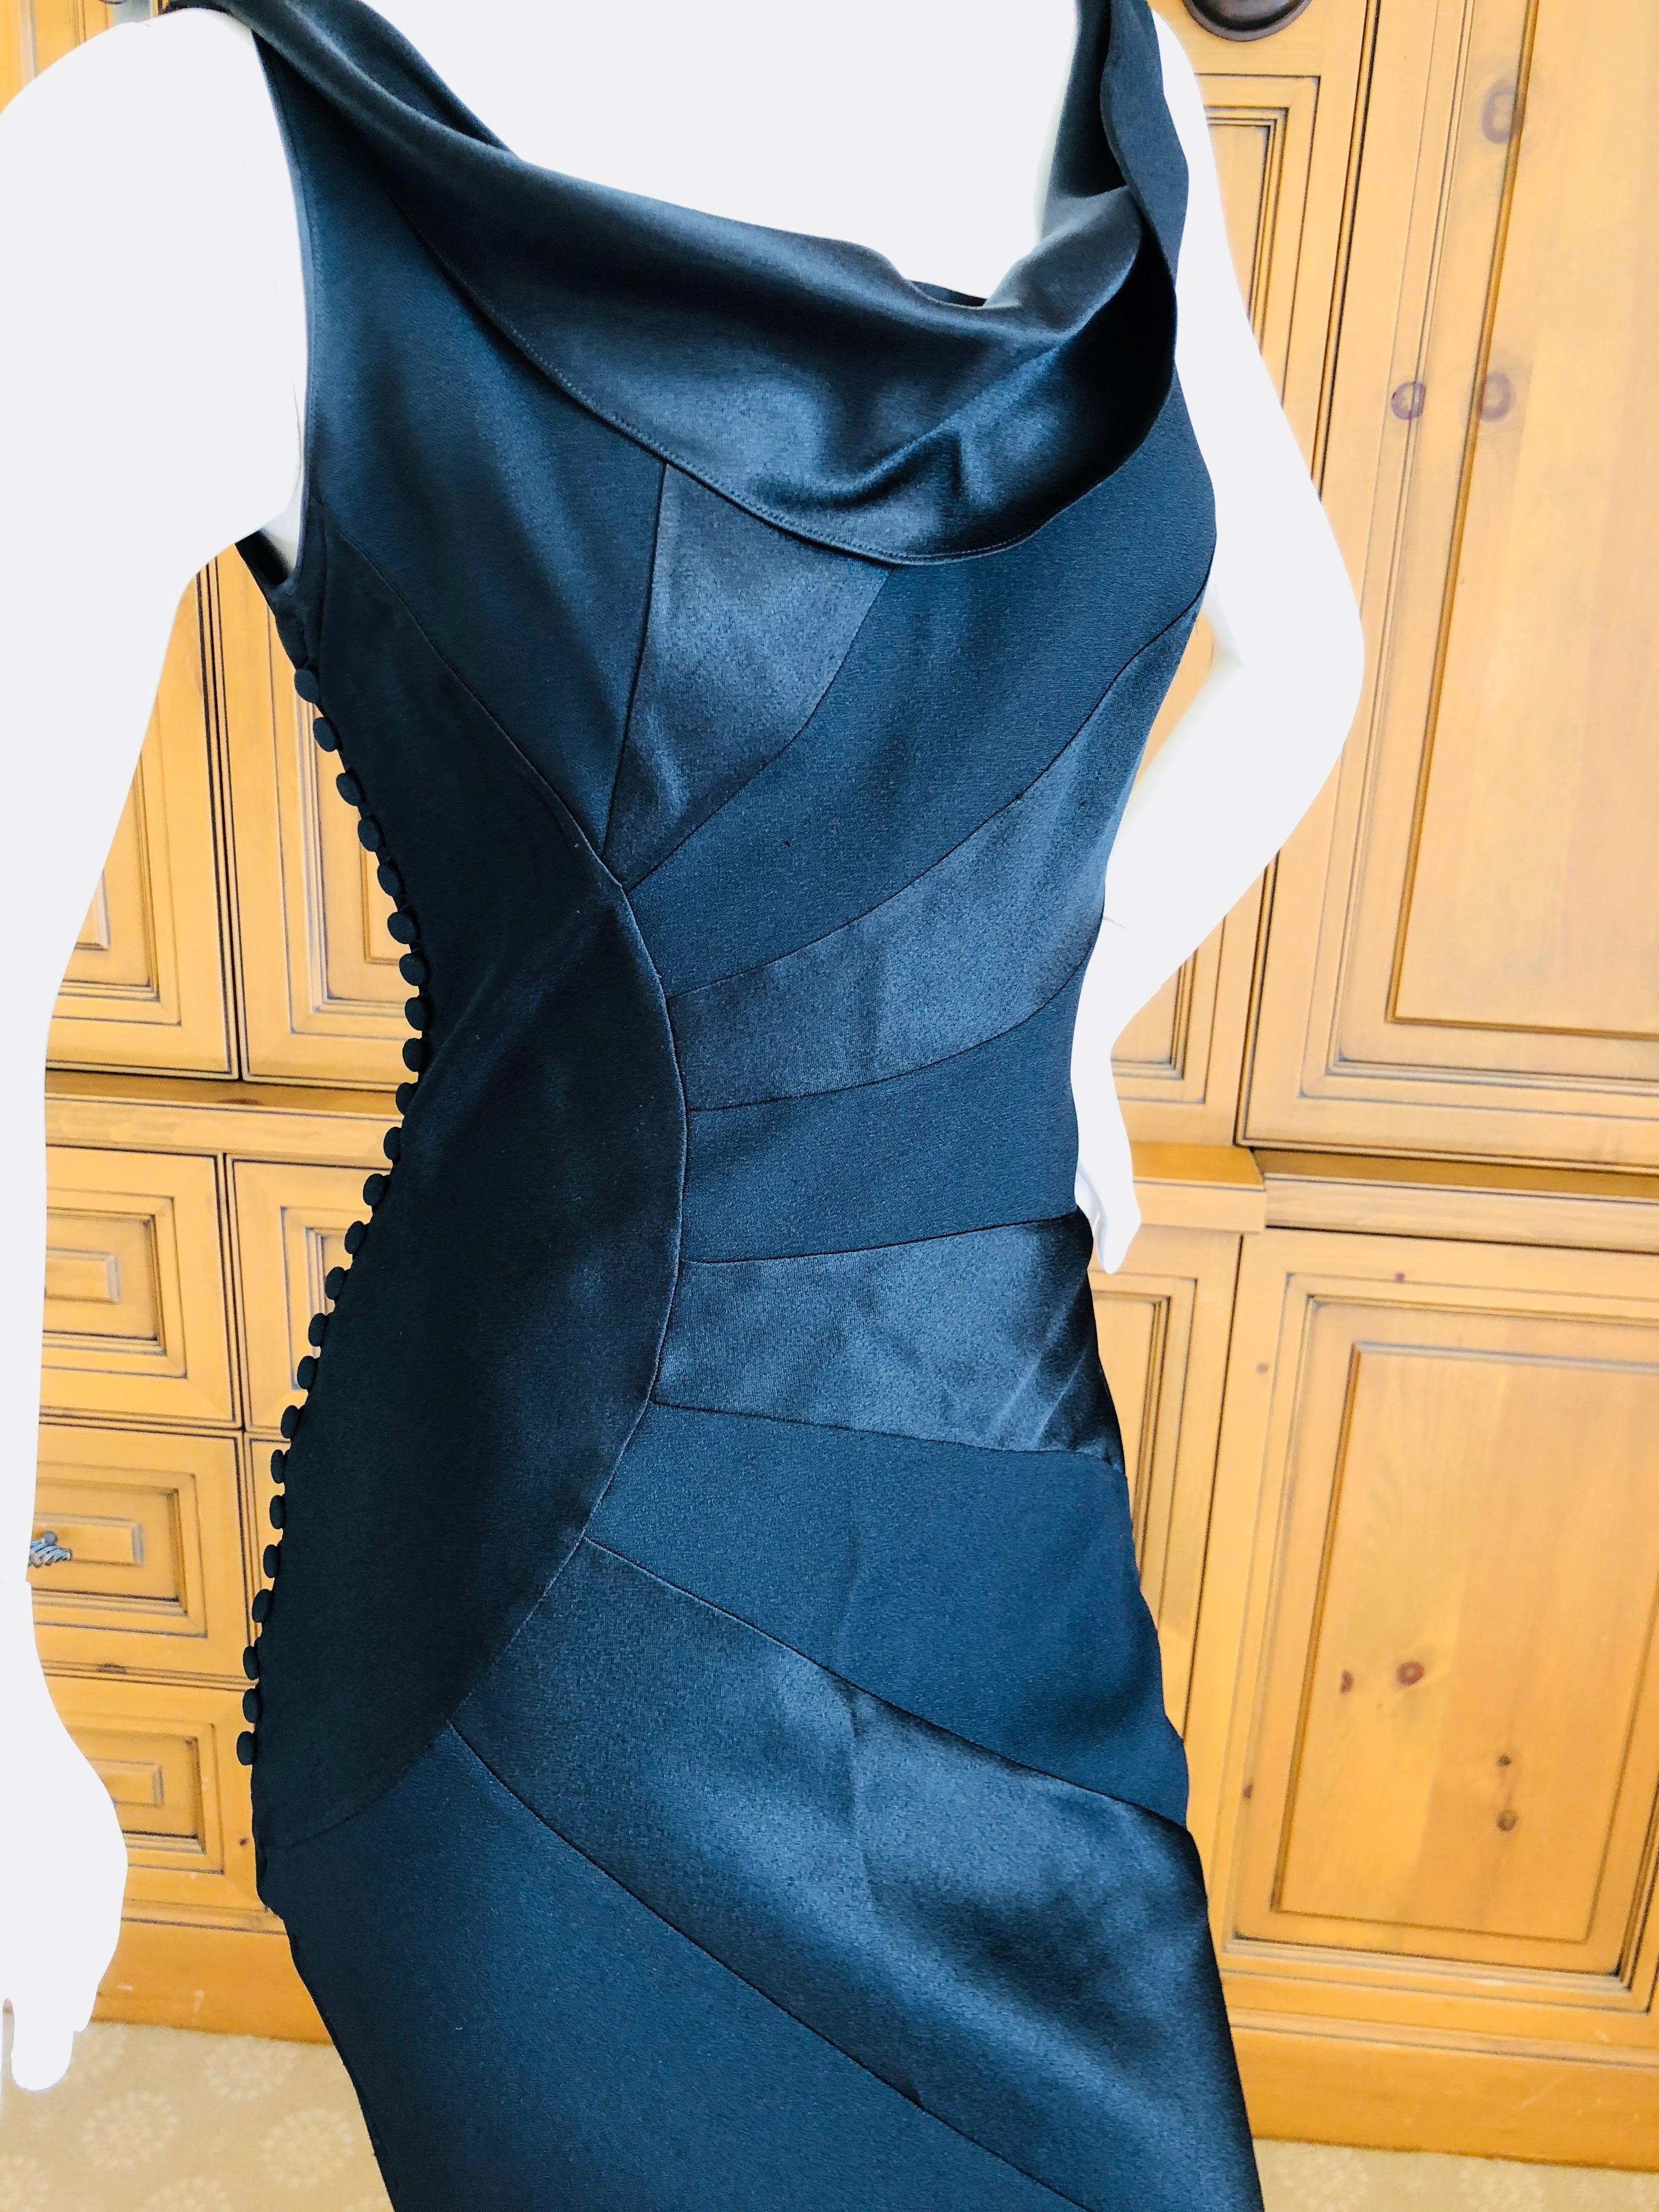 Exquisite black evening dress with a sunburst pattern created by using both the matte and shine surfaces of the fabric, a Galliano signature.
Spring Summer 2000.
Difficult to photograph, this is lovely.
Size 40
Bust 38'
Was it 28